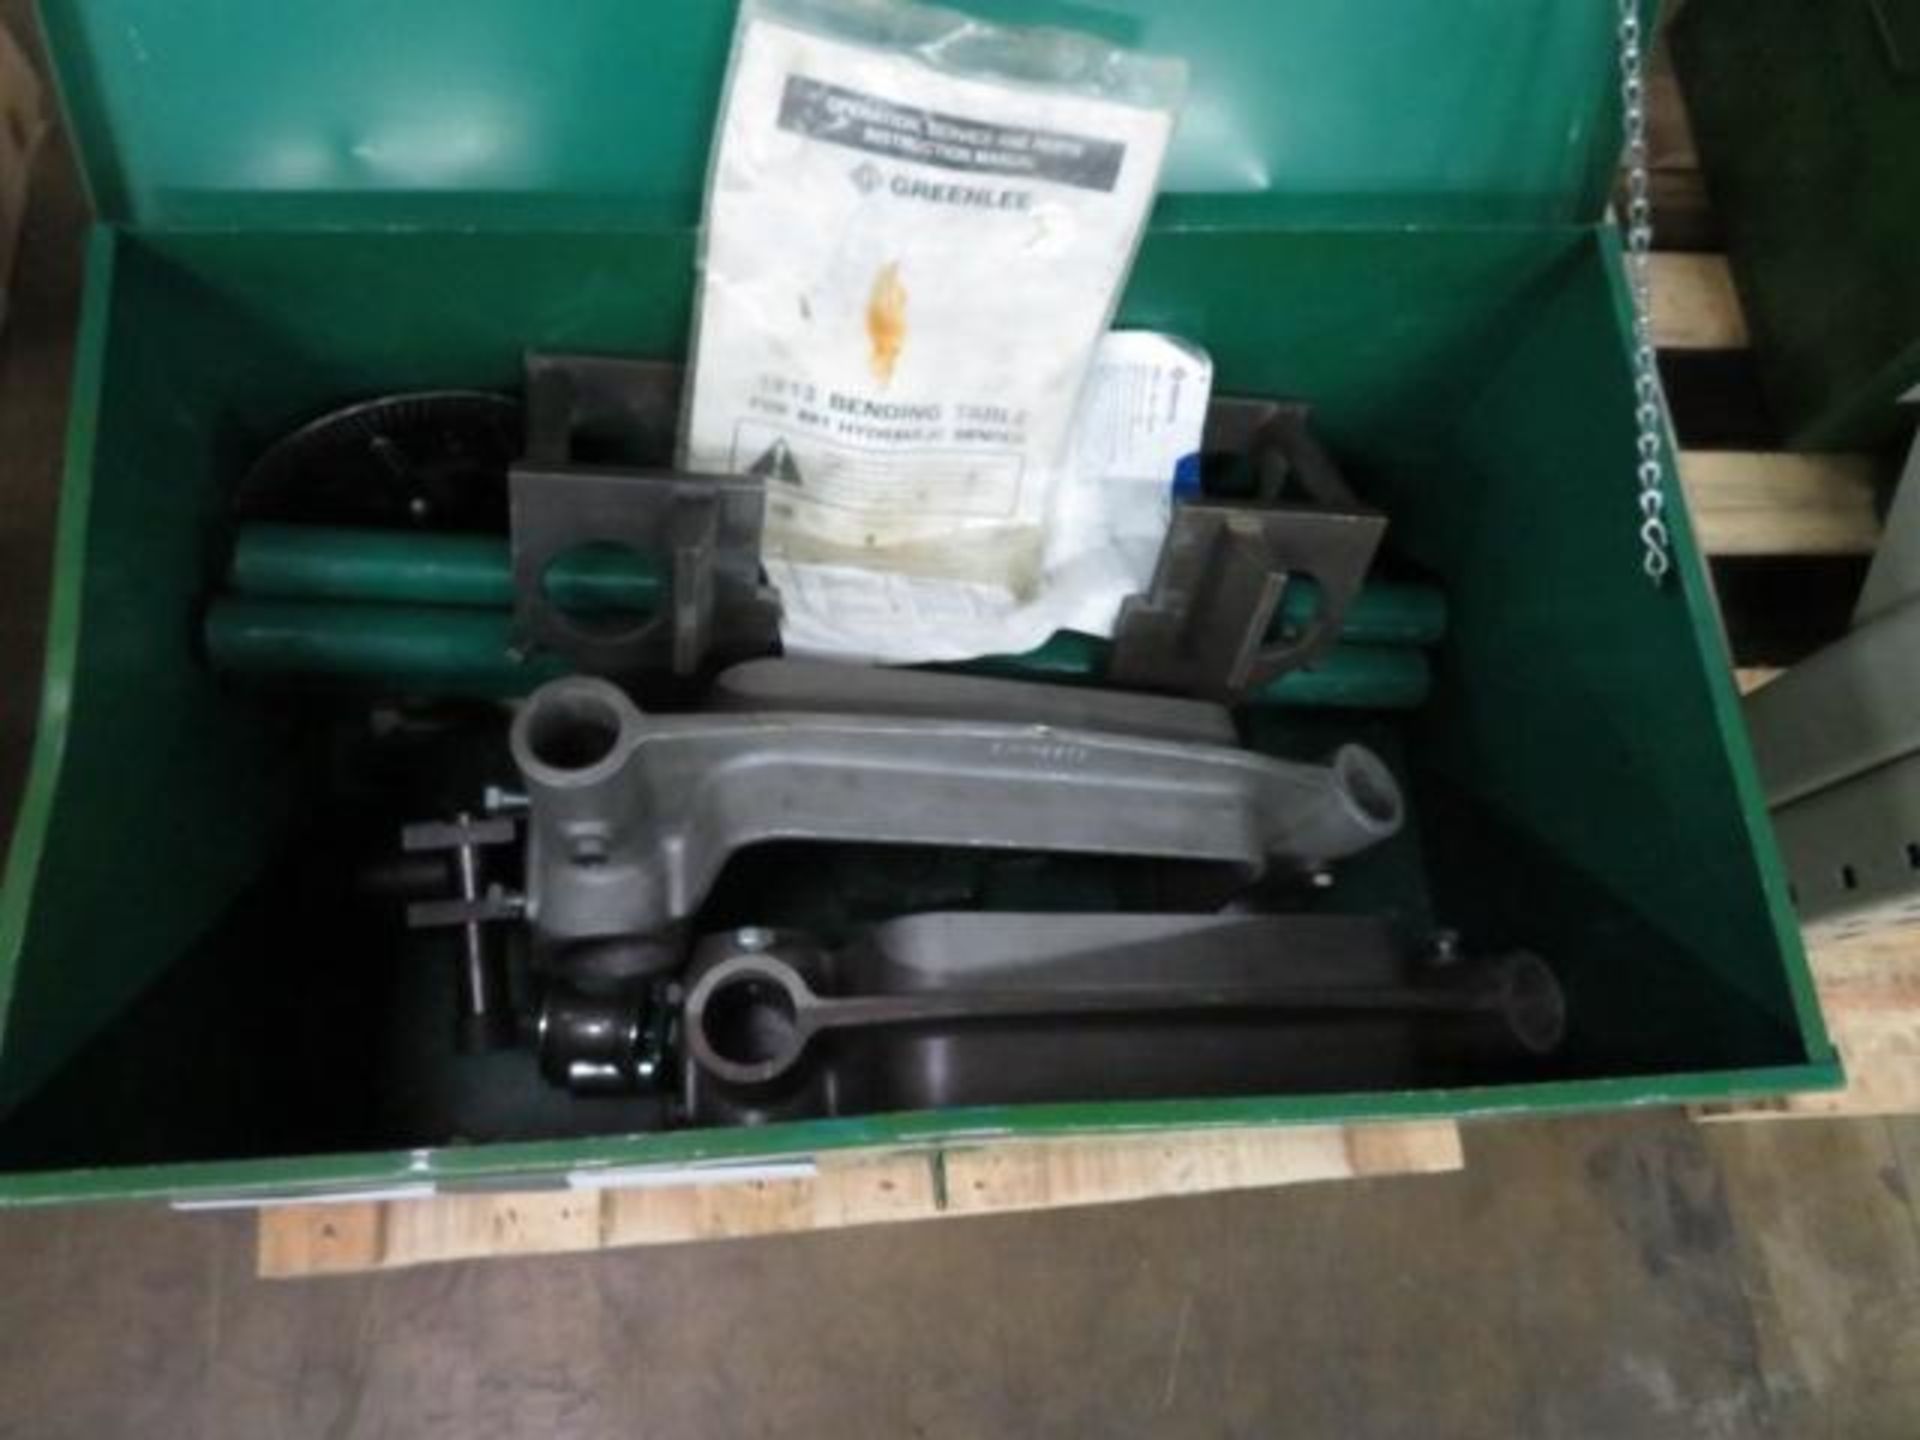 Greenlee No. E881 Bender Table Set-up, with Case